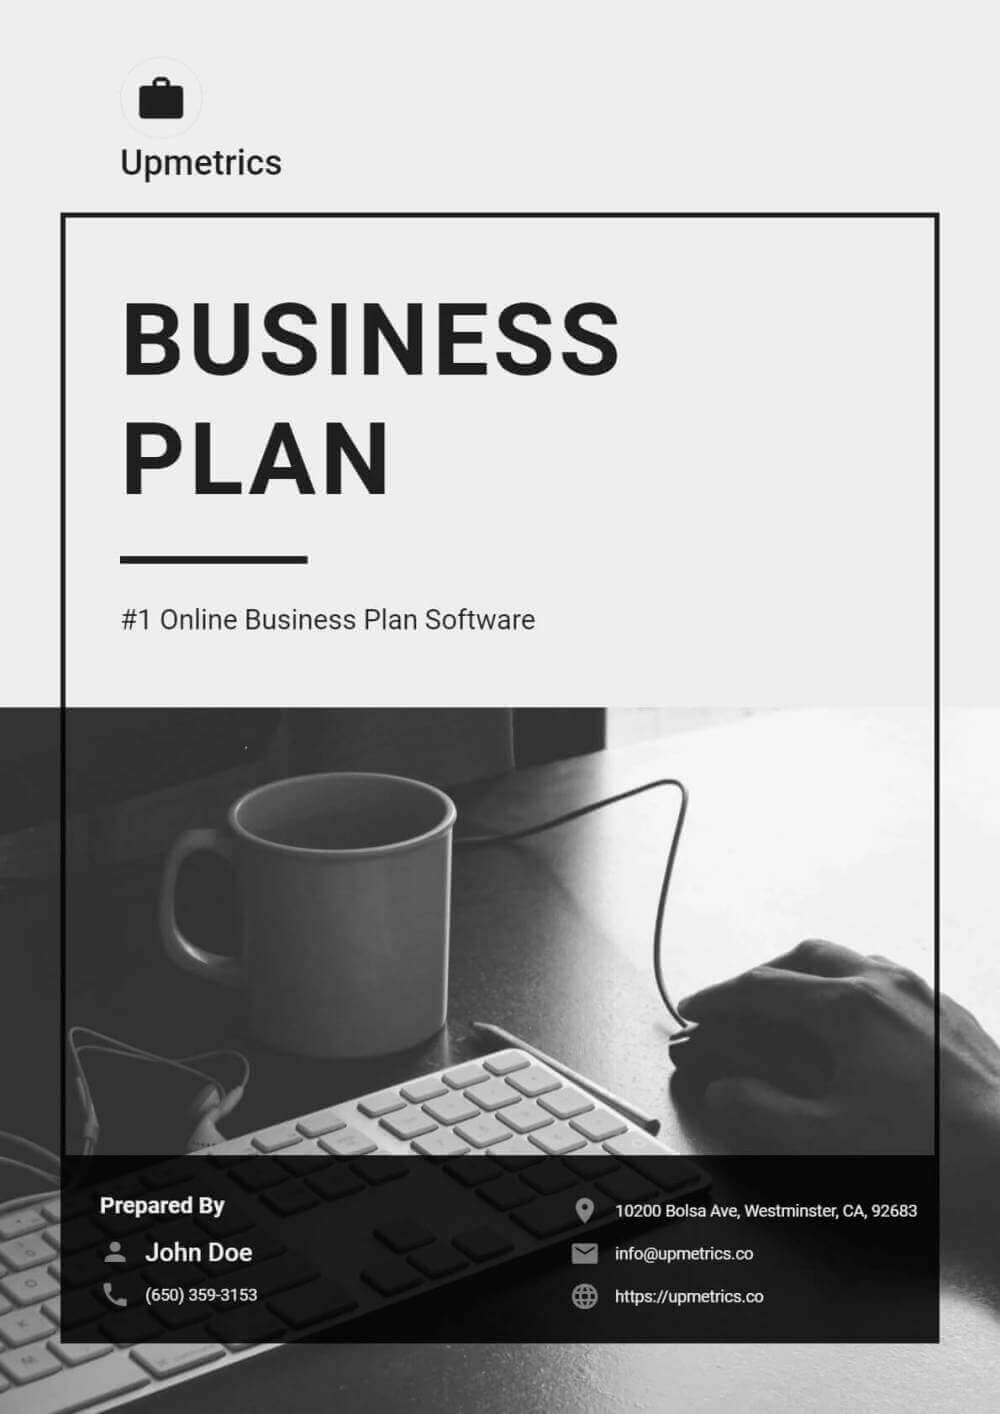 the cover page a business plan should contain